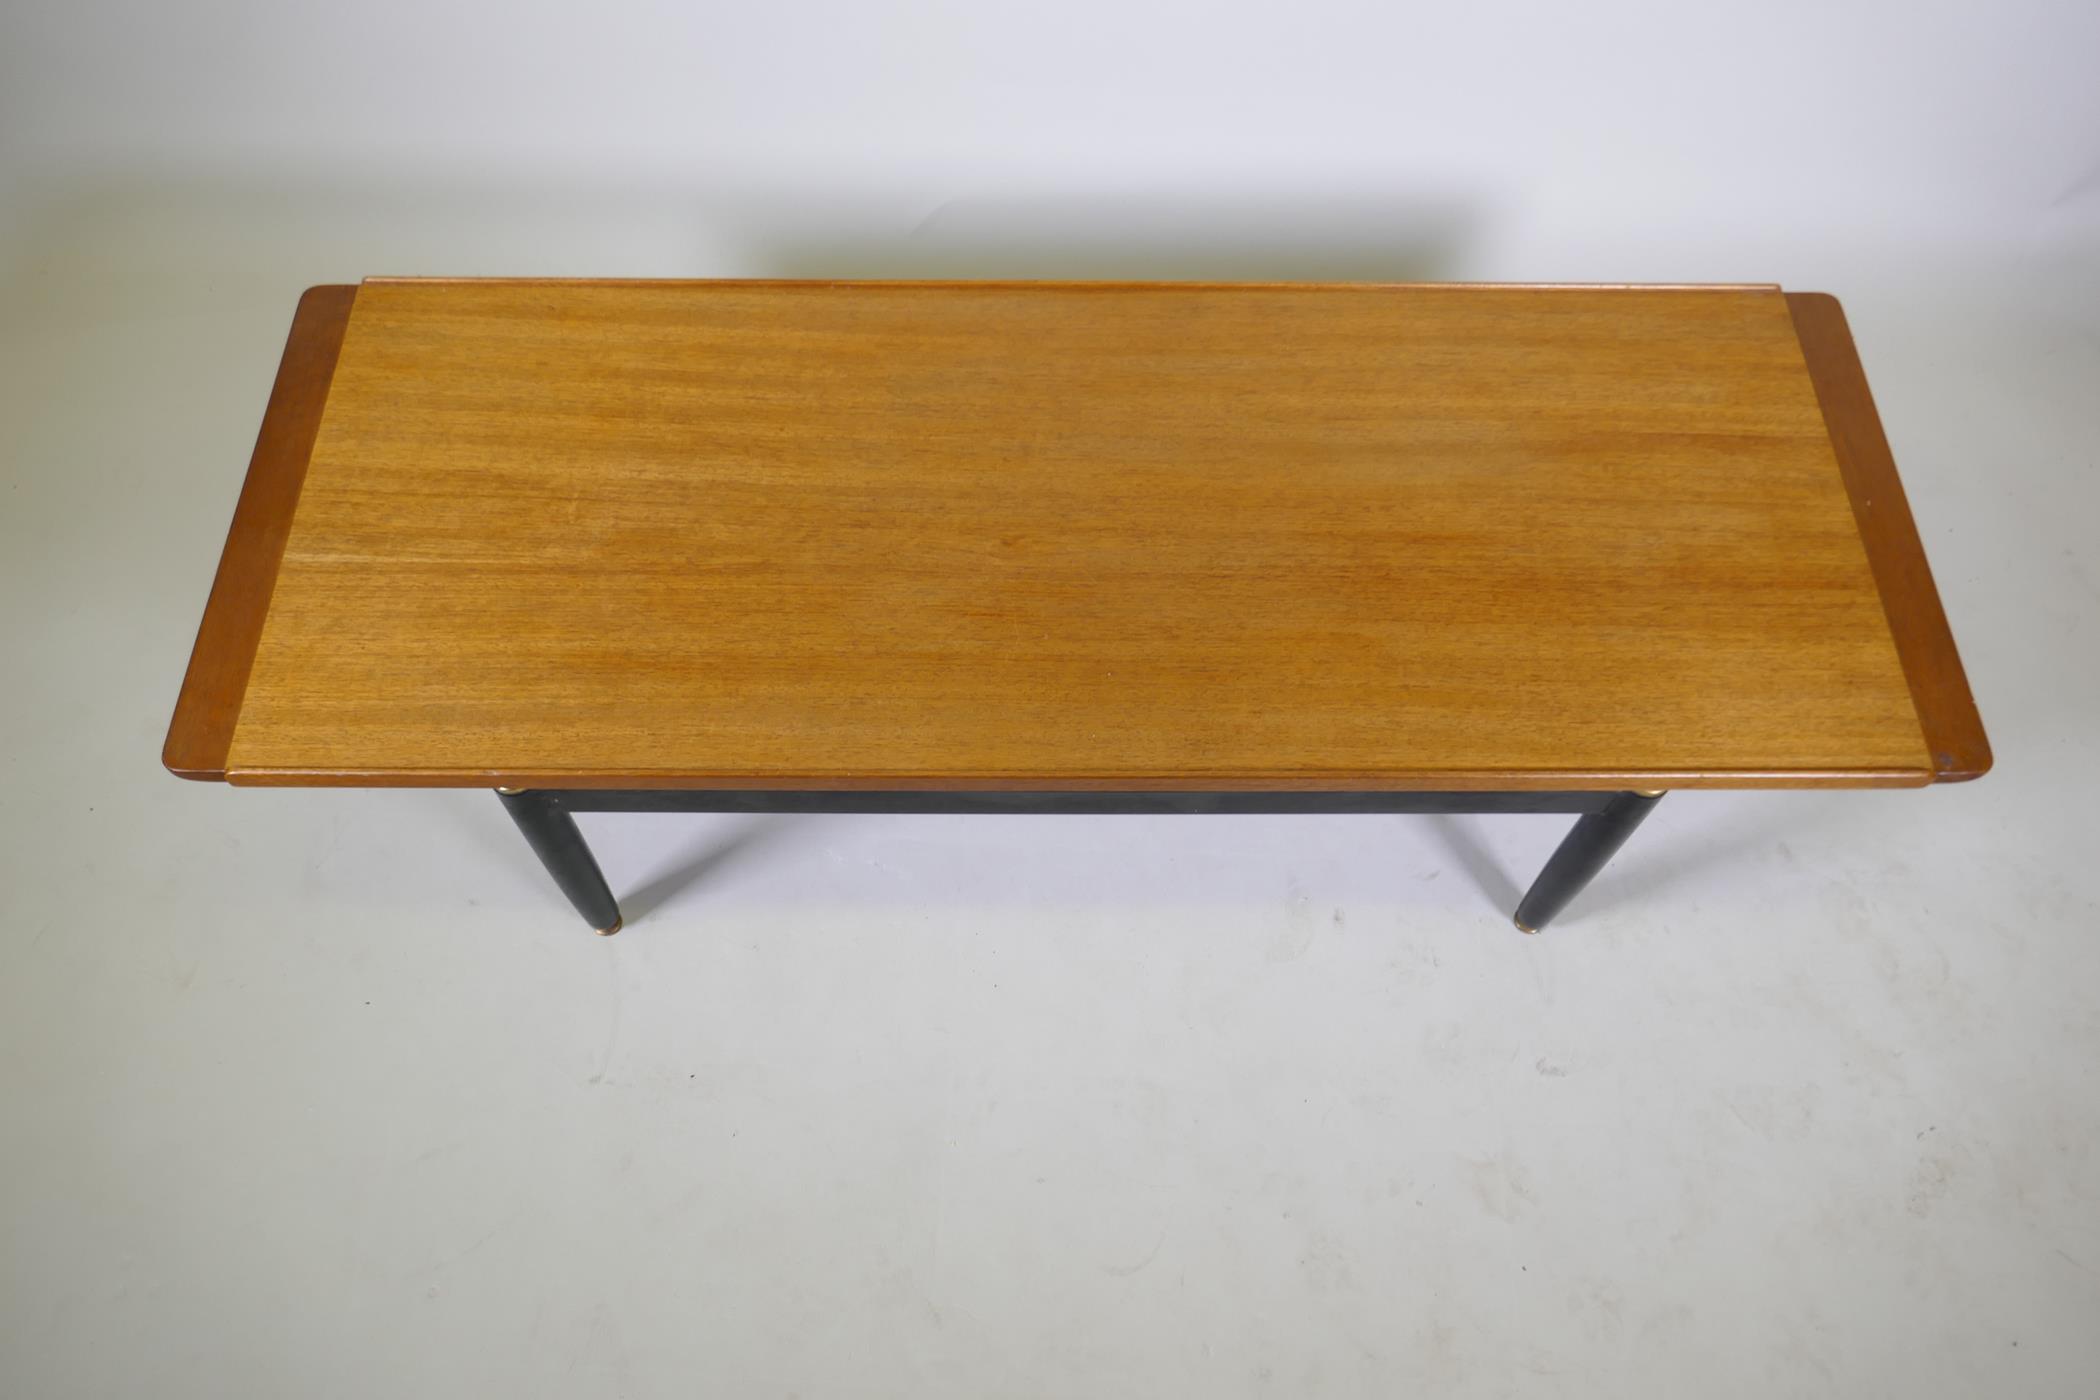 A G-Plan Librenza tola coffee table, 138 x 50 x 40cm, and a mid century teak top coffee table - Image 4 of 6